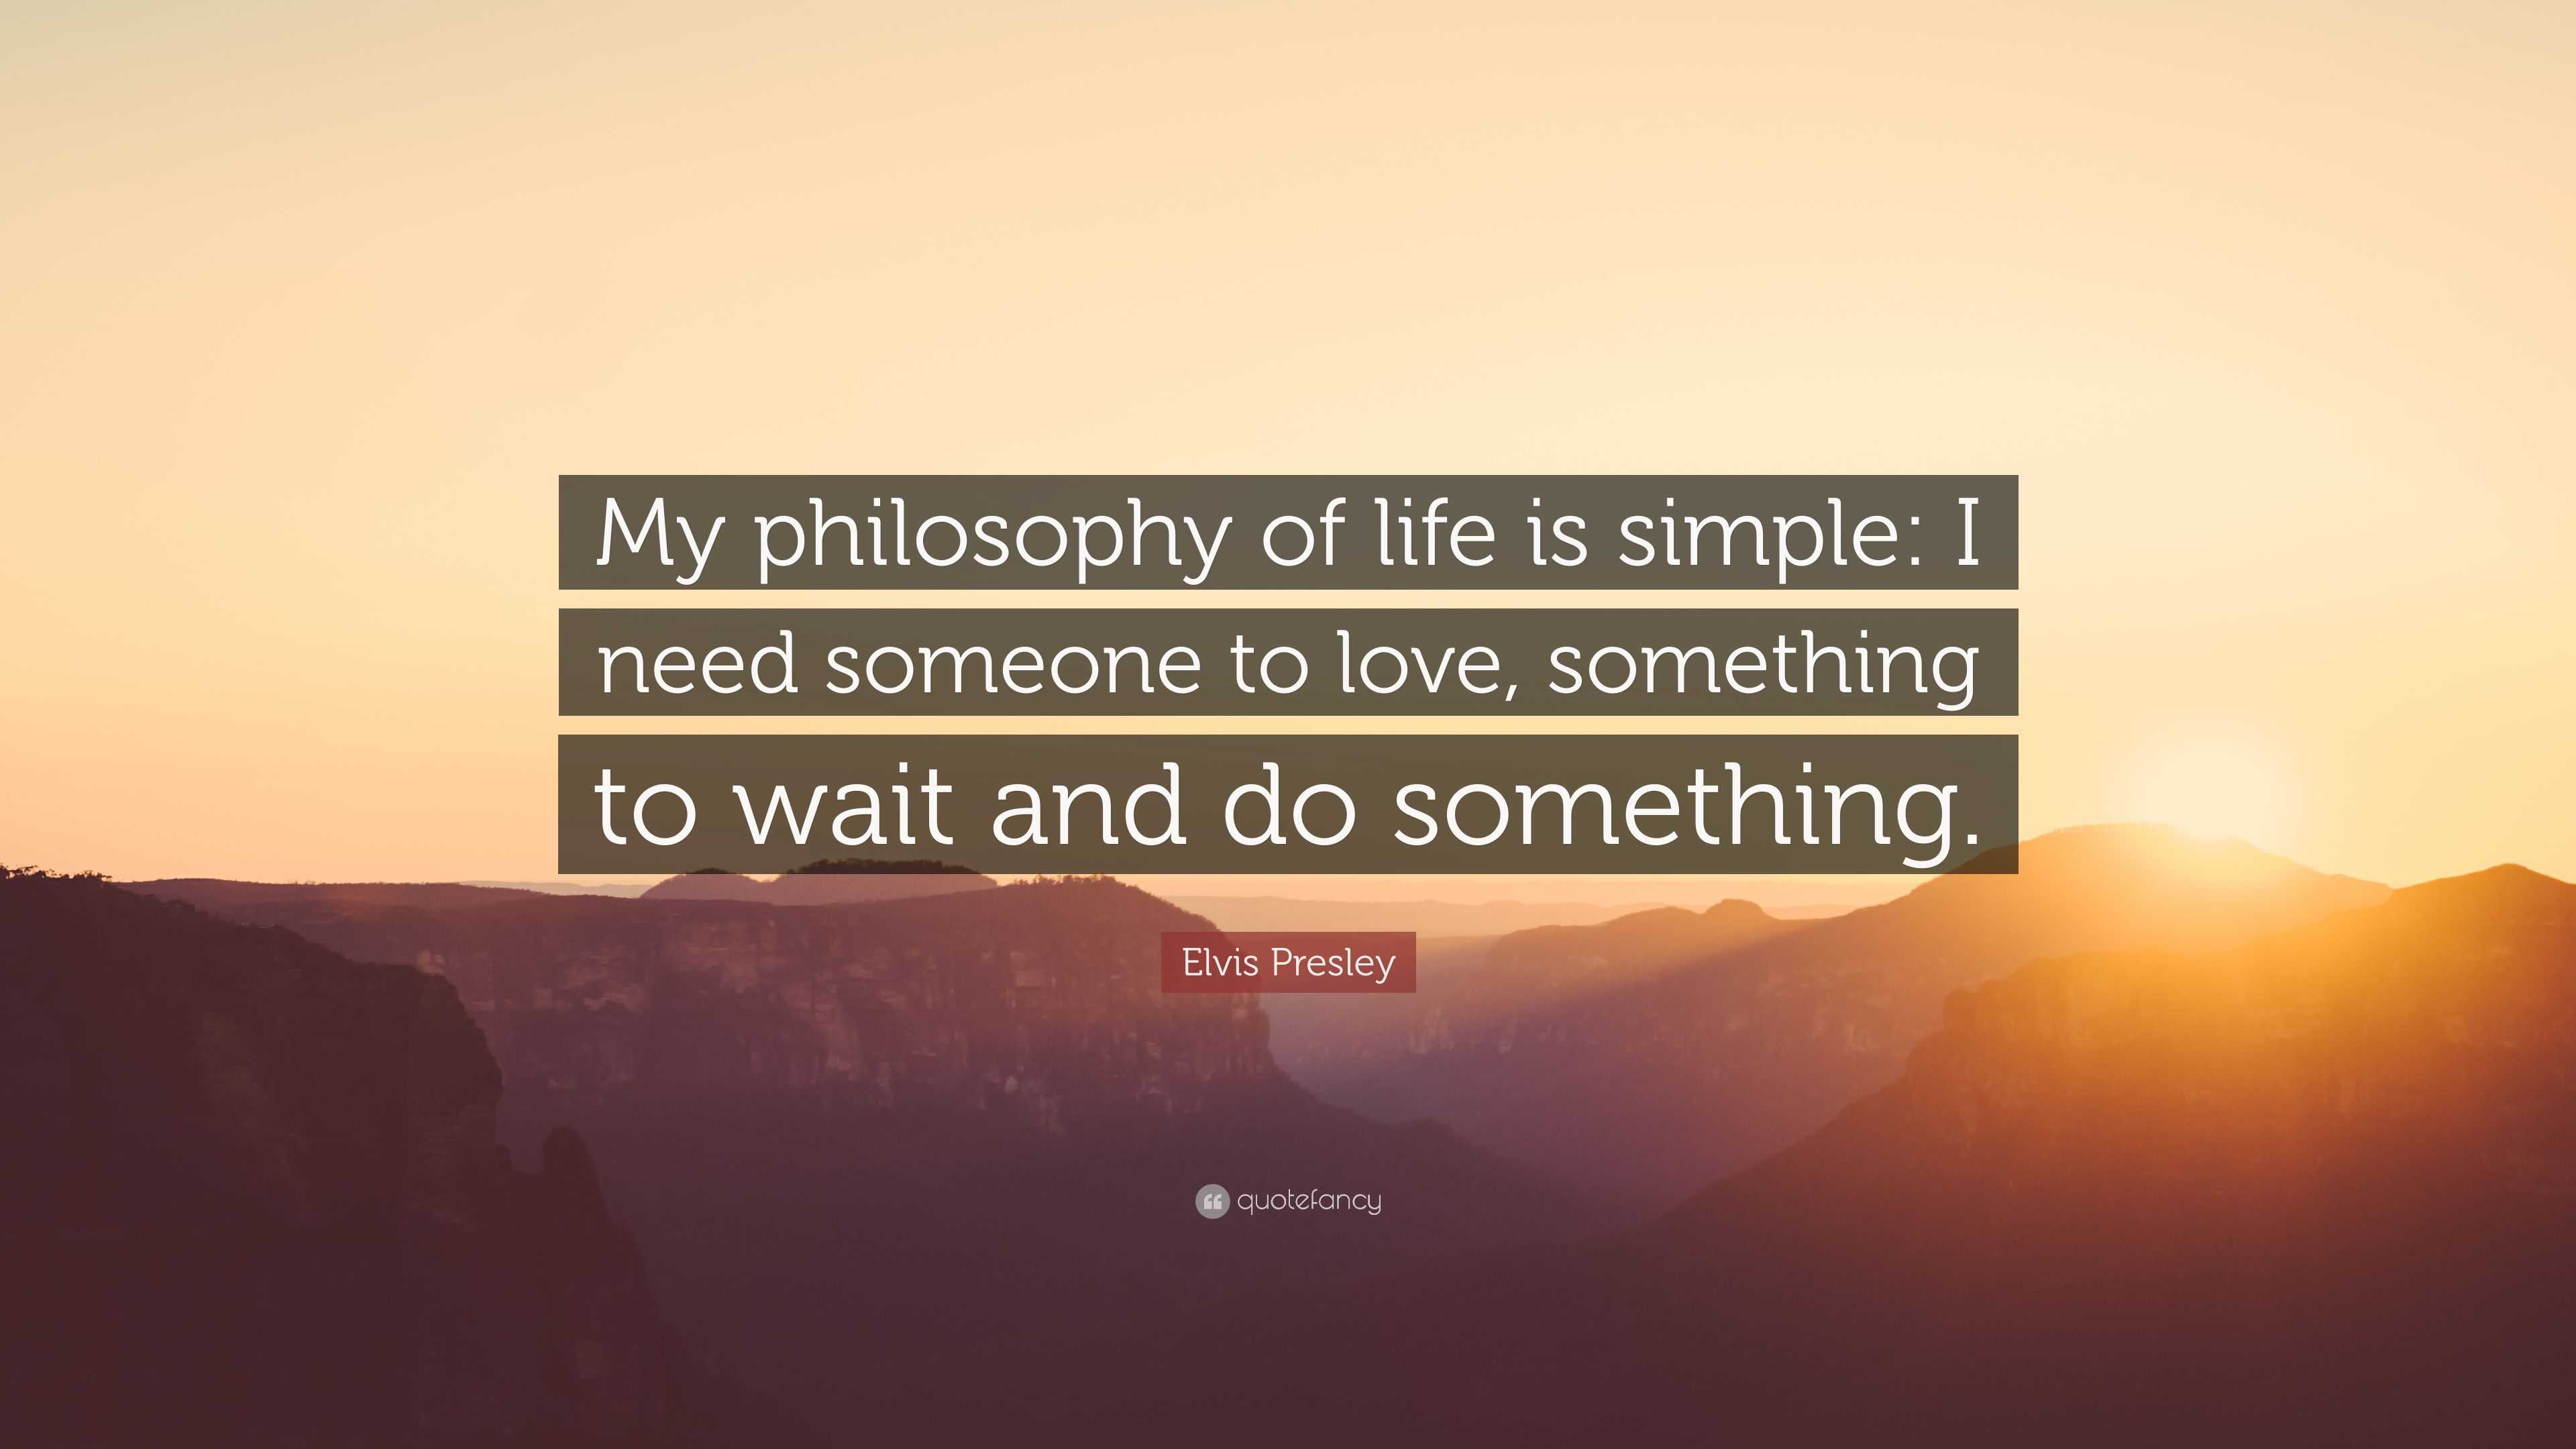 Elvis Presley Quote “My philosophy of life is simple I need someone to